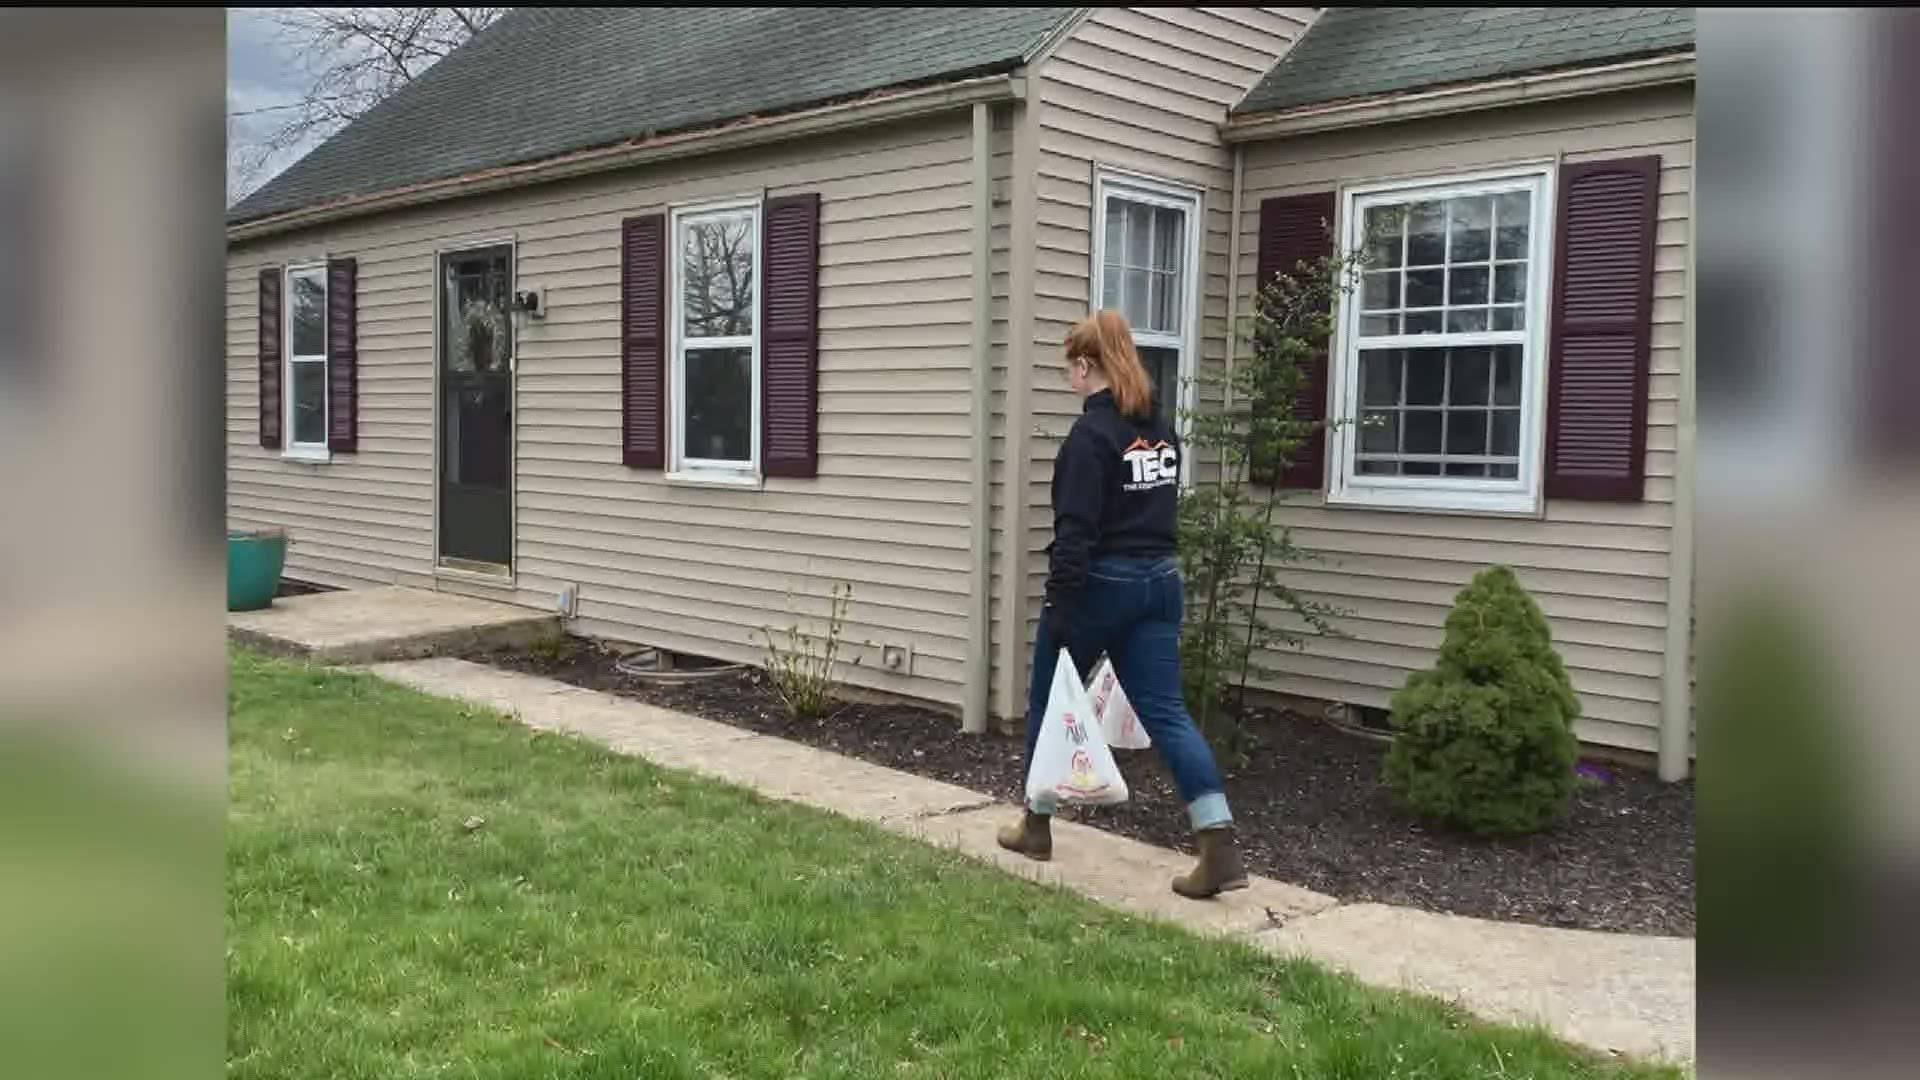 The stay-at-home order has inspired employees at a Lancaster County business to help out their fellow neighbors in need.